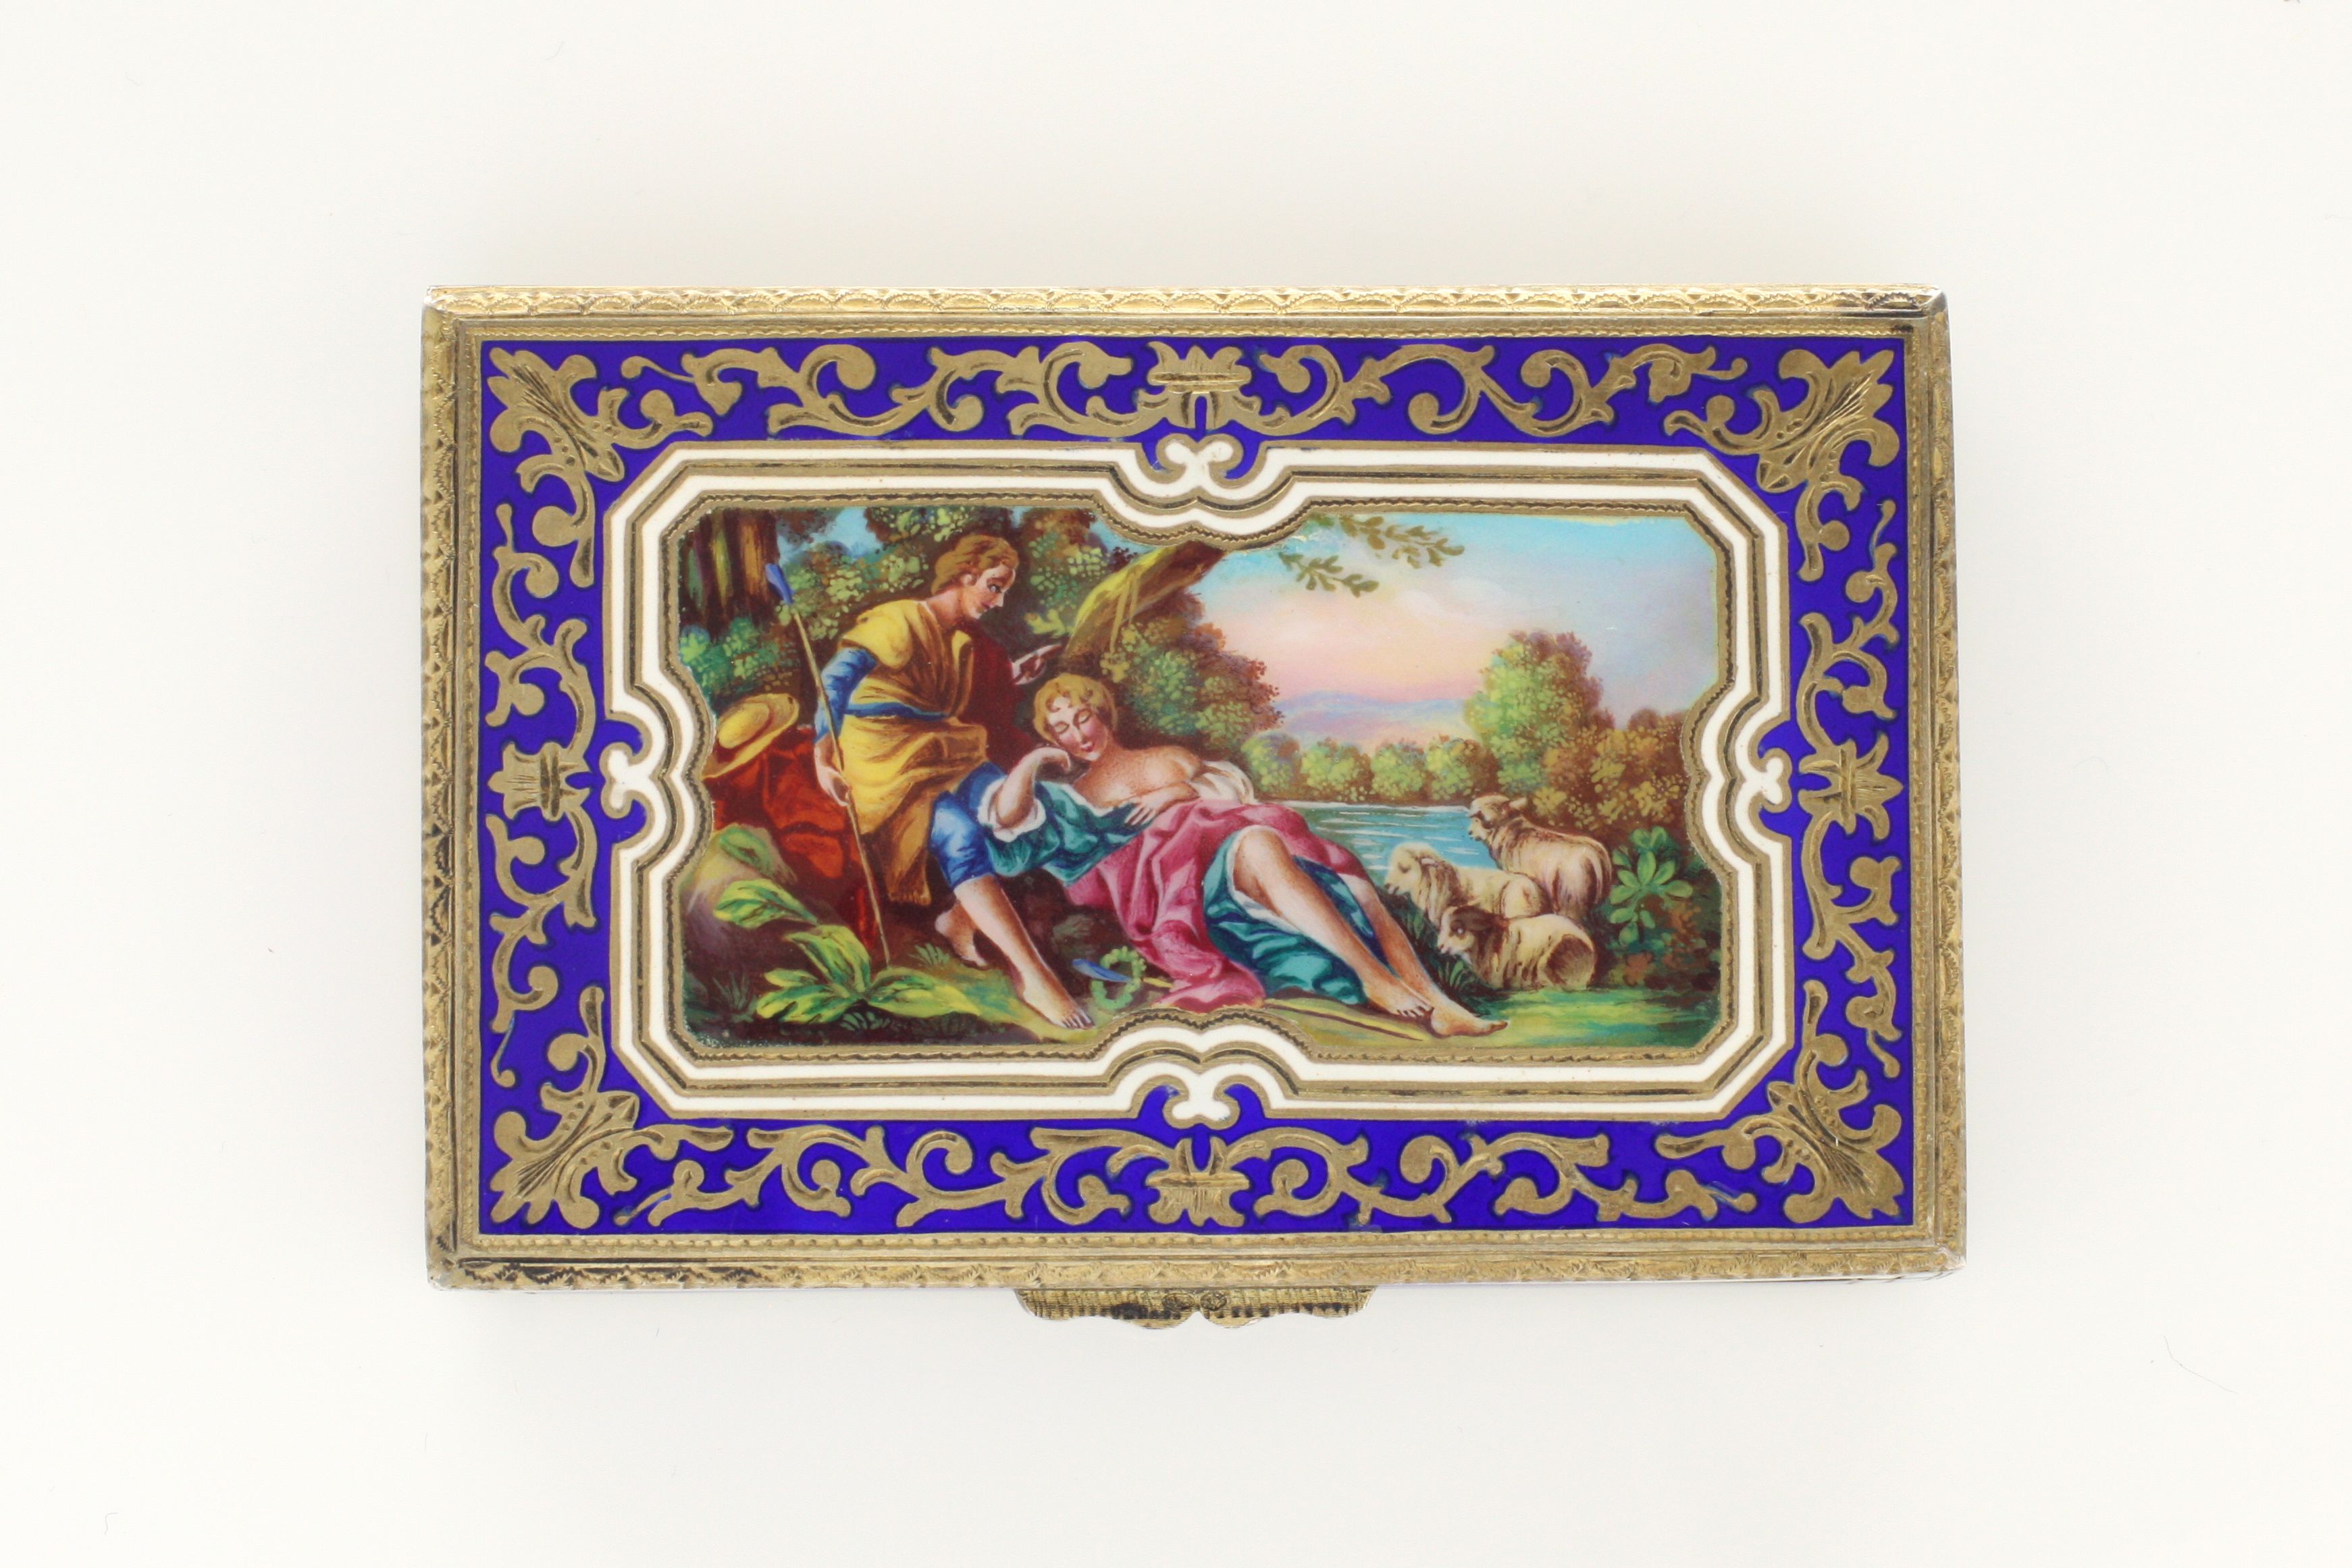 A continental silver gilt and enamel box the top finely decorated with an enamel scene of figures